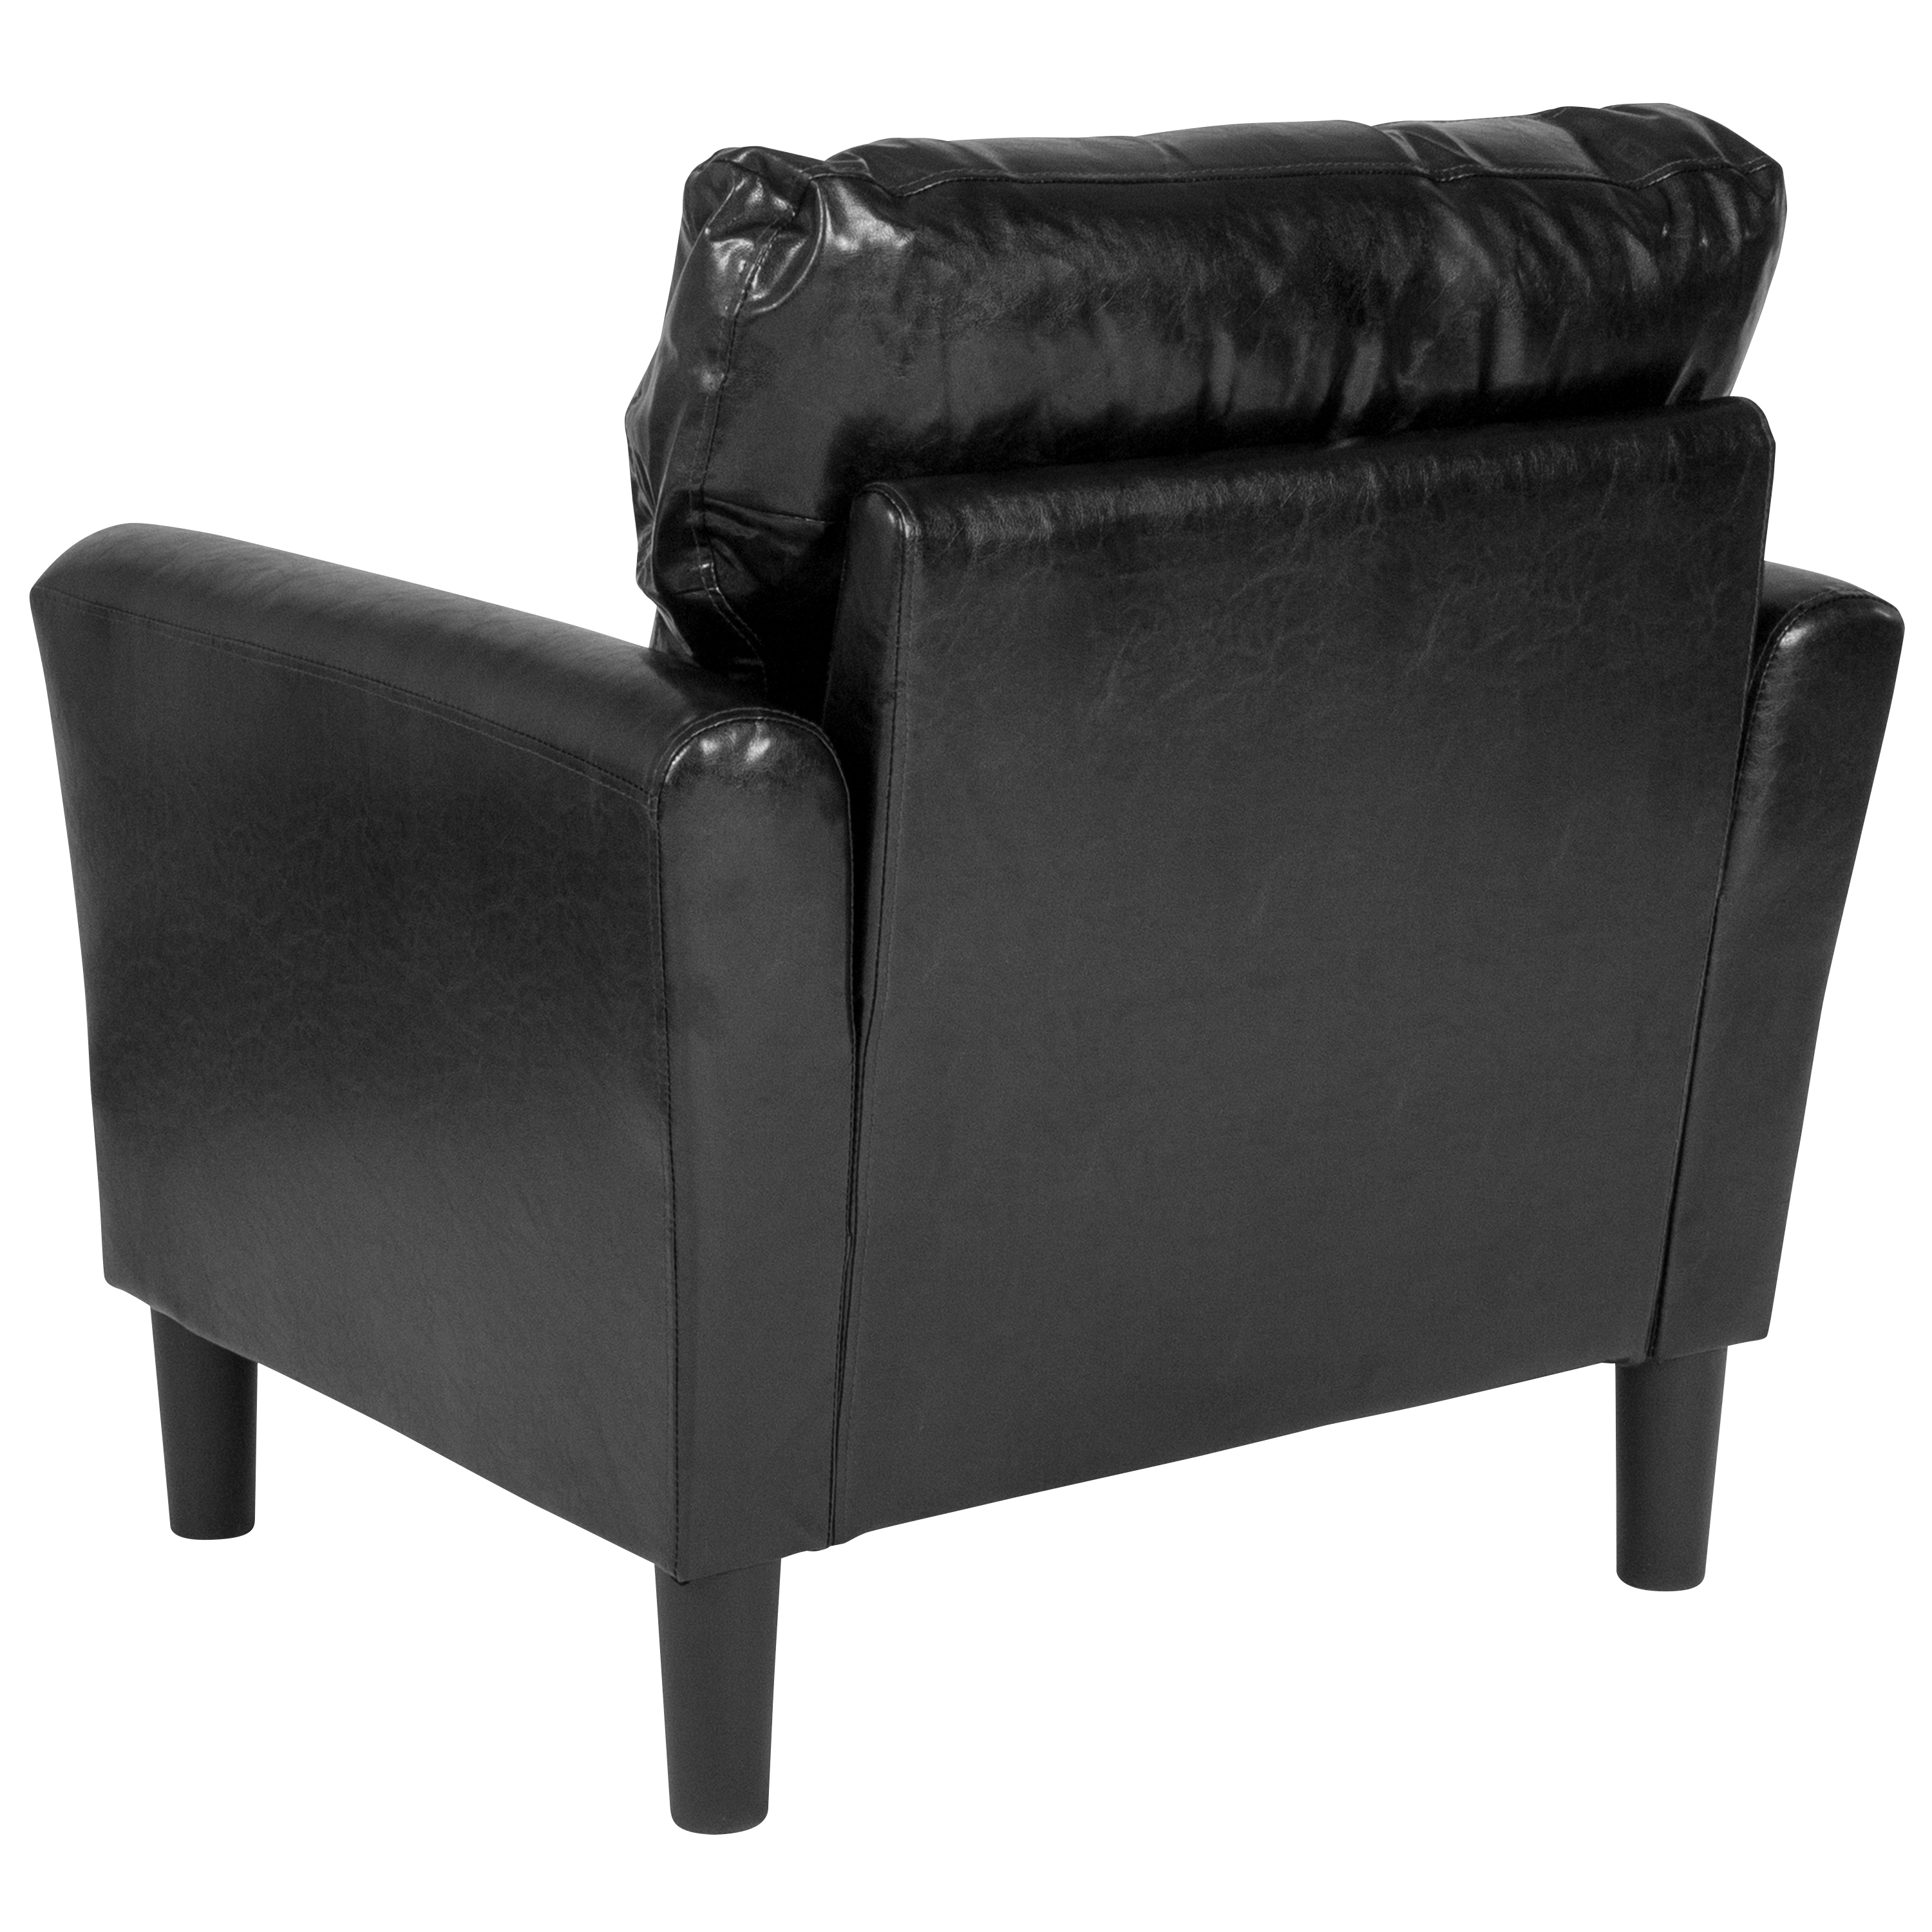 Flash Furniture Bari Upholstered Chair in Black LeatherSoft - image 3 of 5